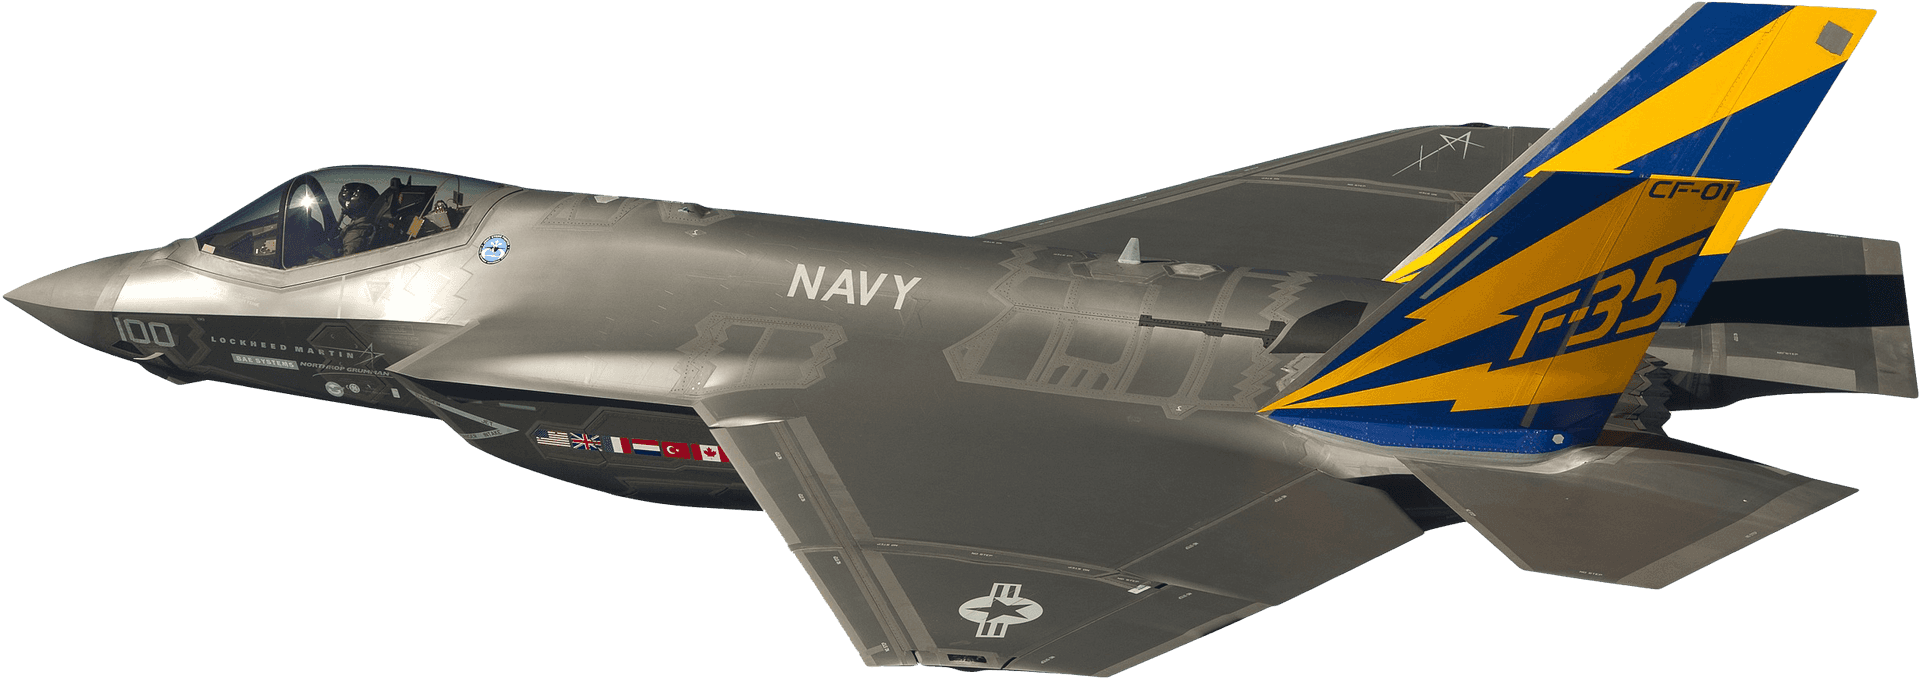 F35 Jet Fighter Navy Aircraft PNG image